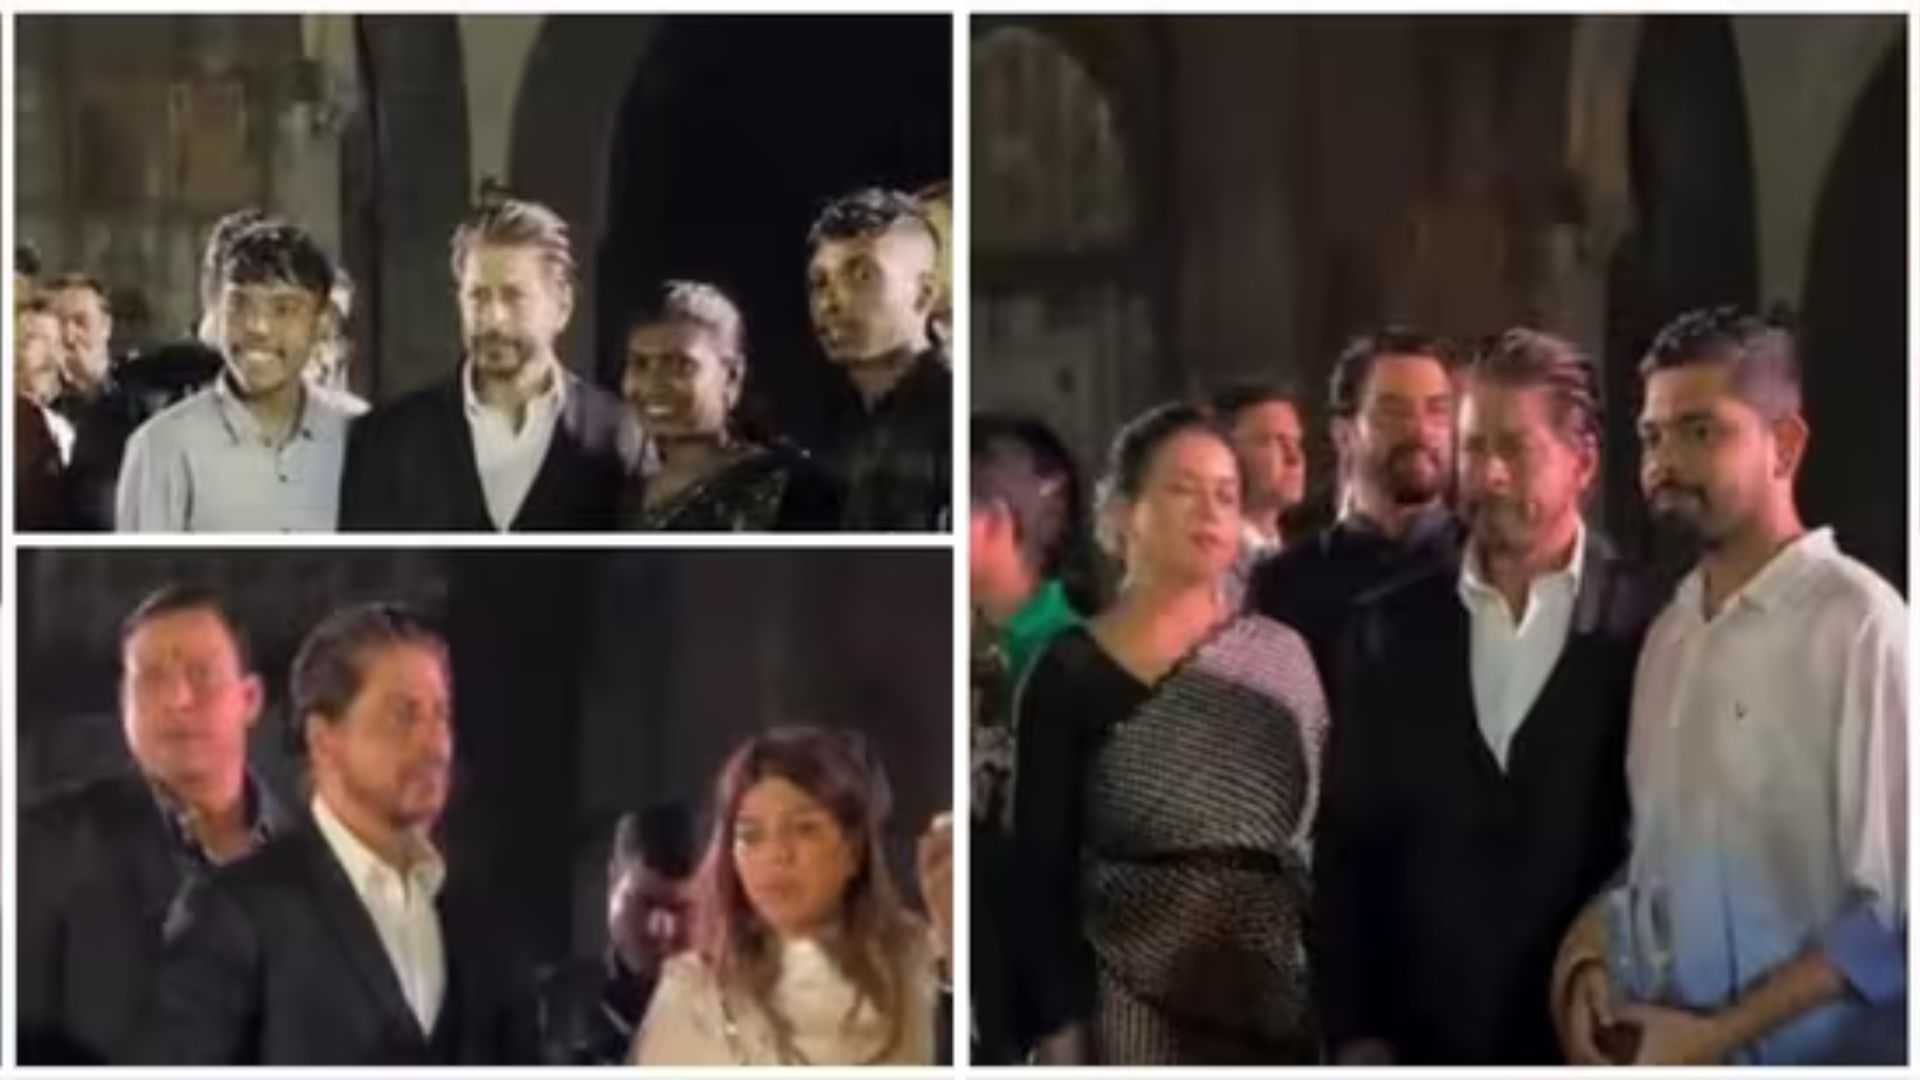 'Such a gentleman' : Shah Rukh Khan meets the families of the 26/11 terror attack victims in a tribute event, watch